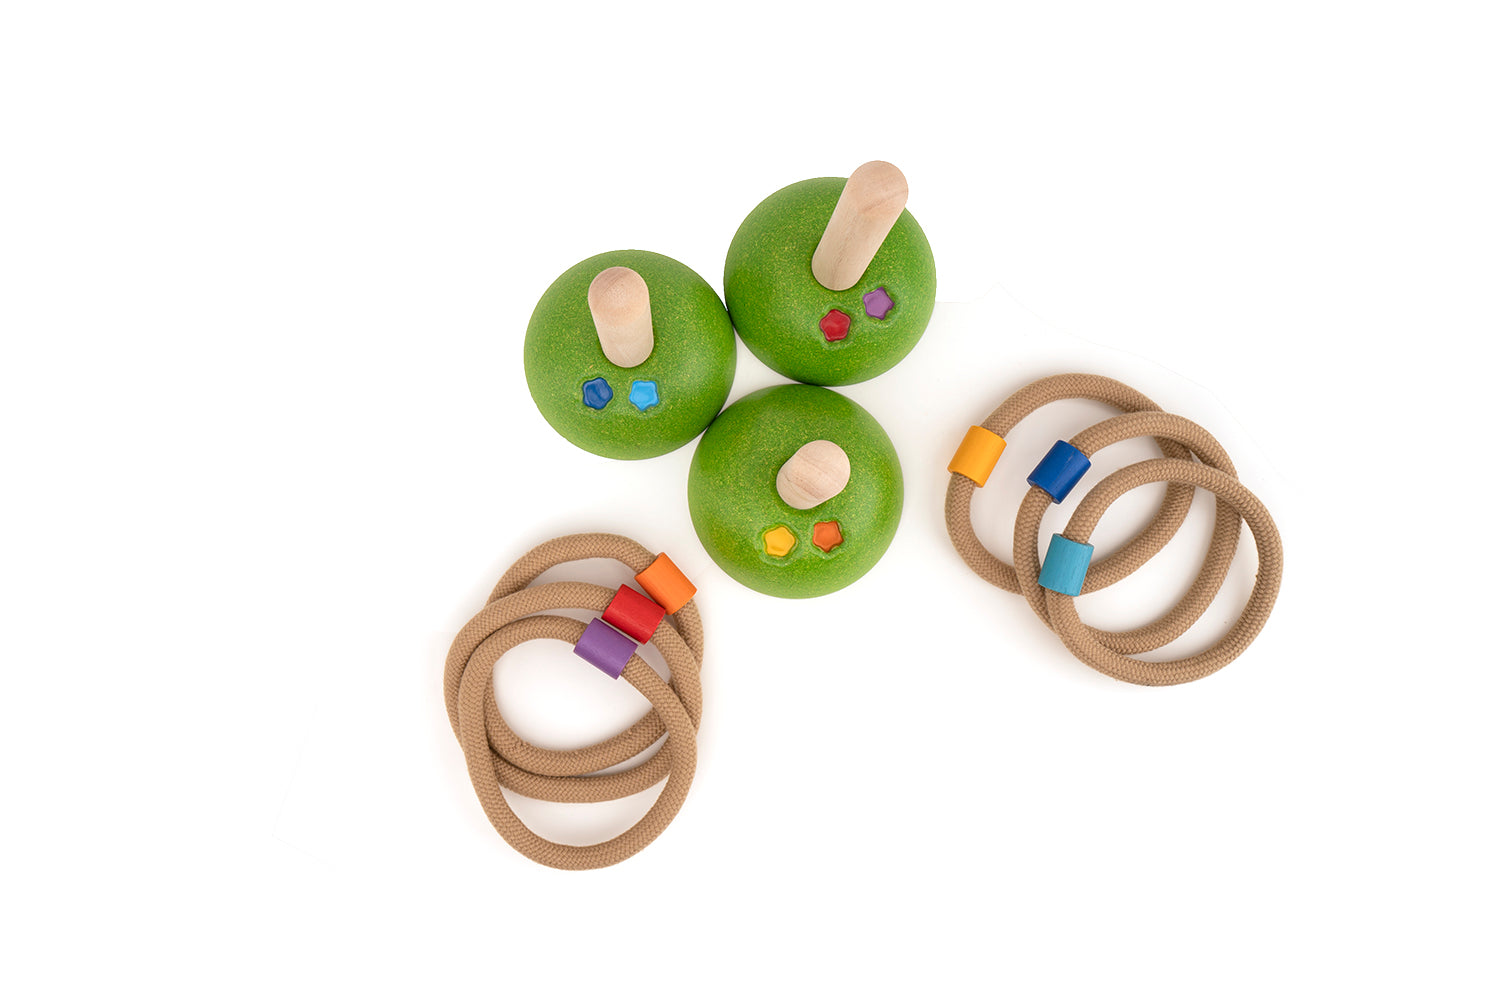 Little's Stacking Ring Kids Toy I Ring Game for Kids (Multicolour) (Medium)  : Amazon.in: Toys & Games